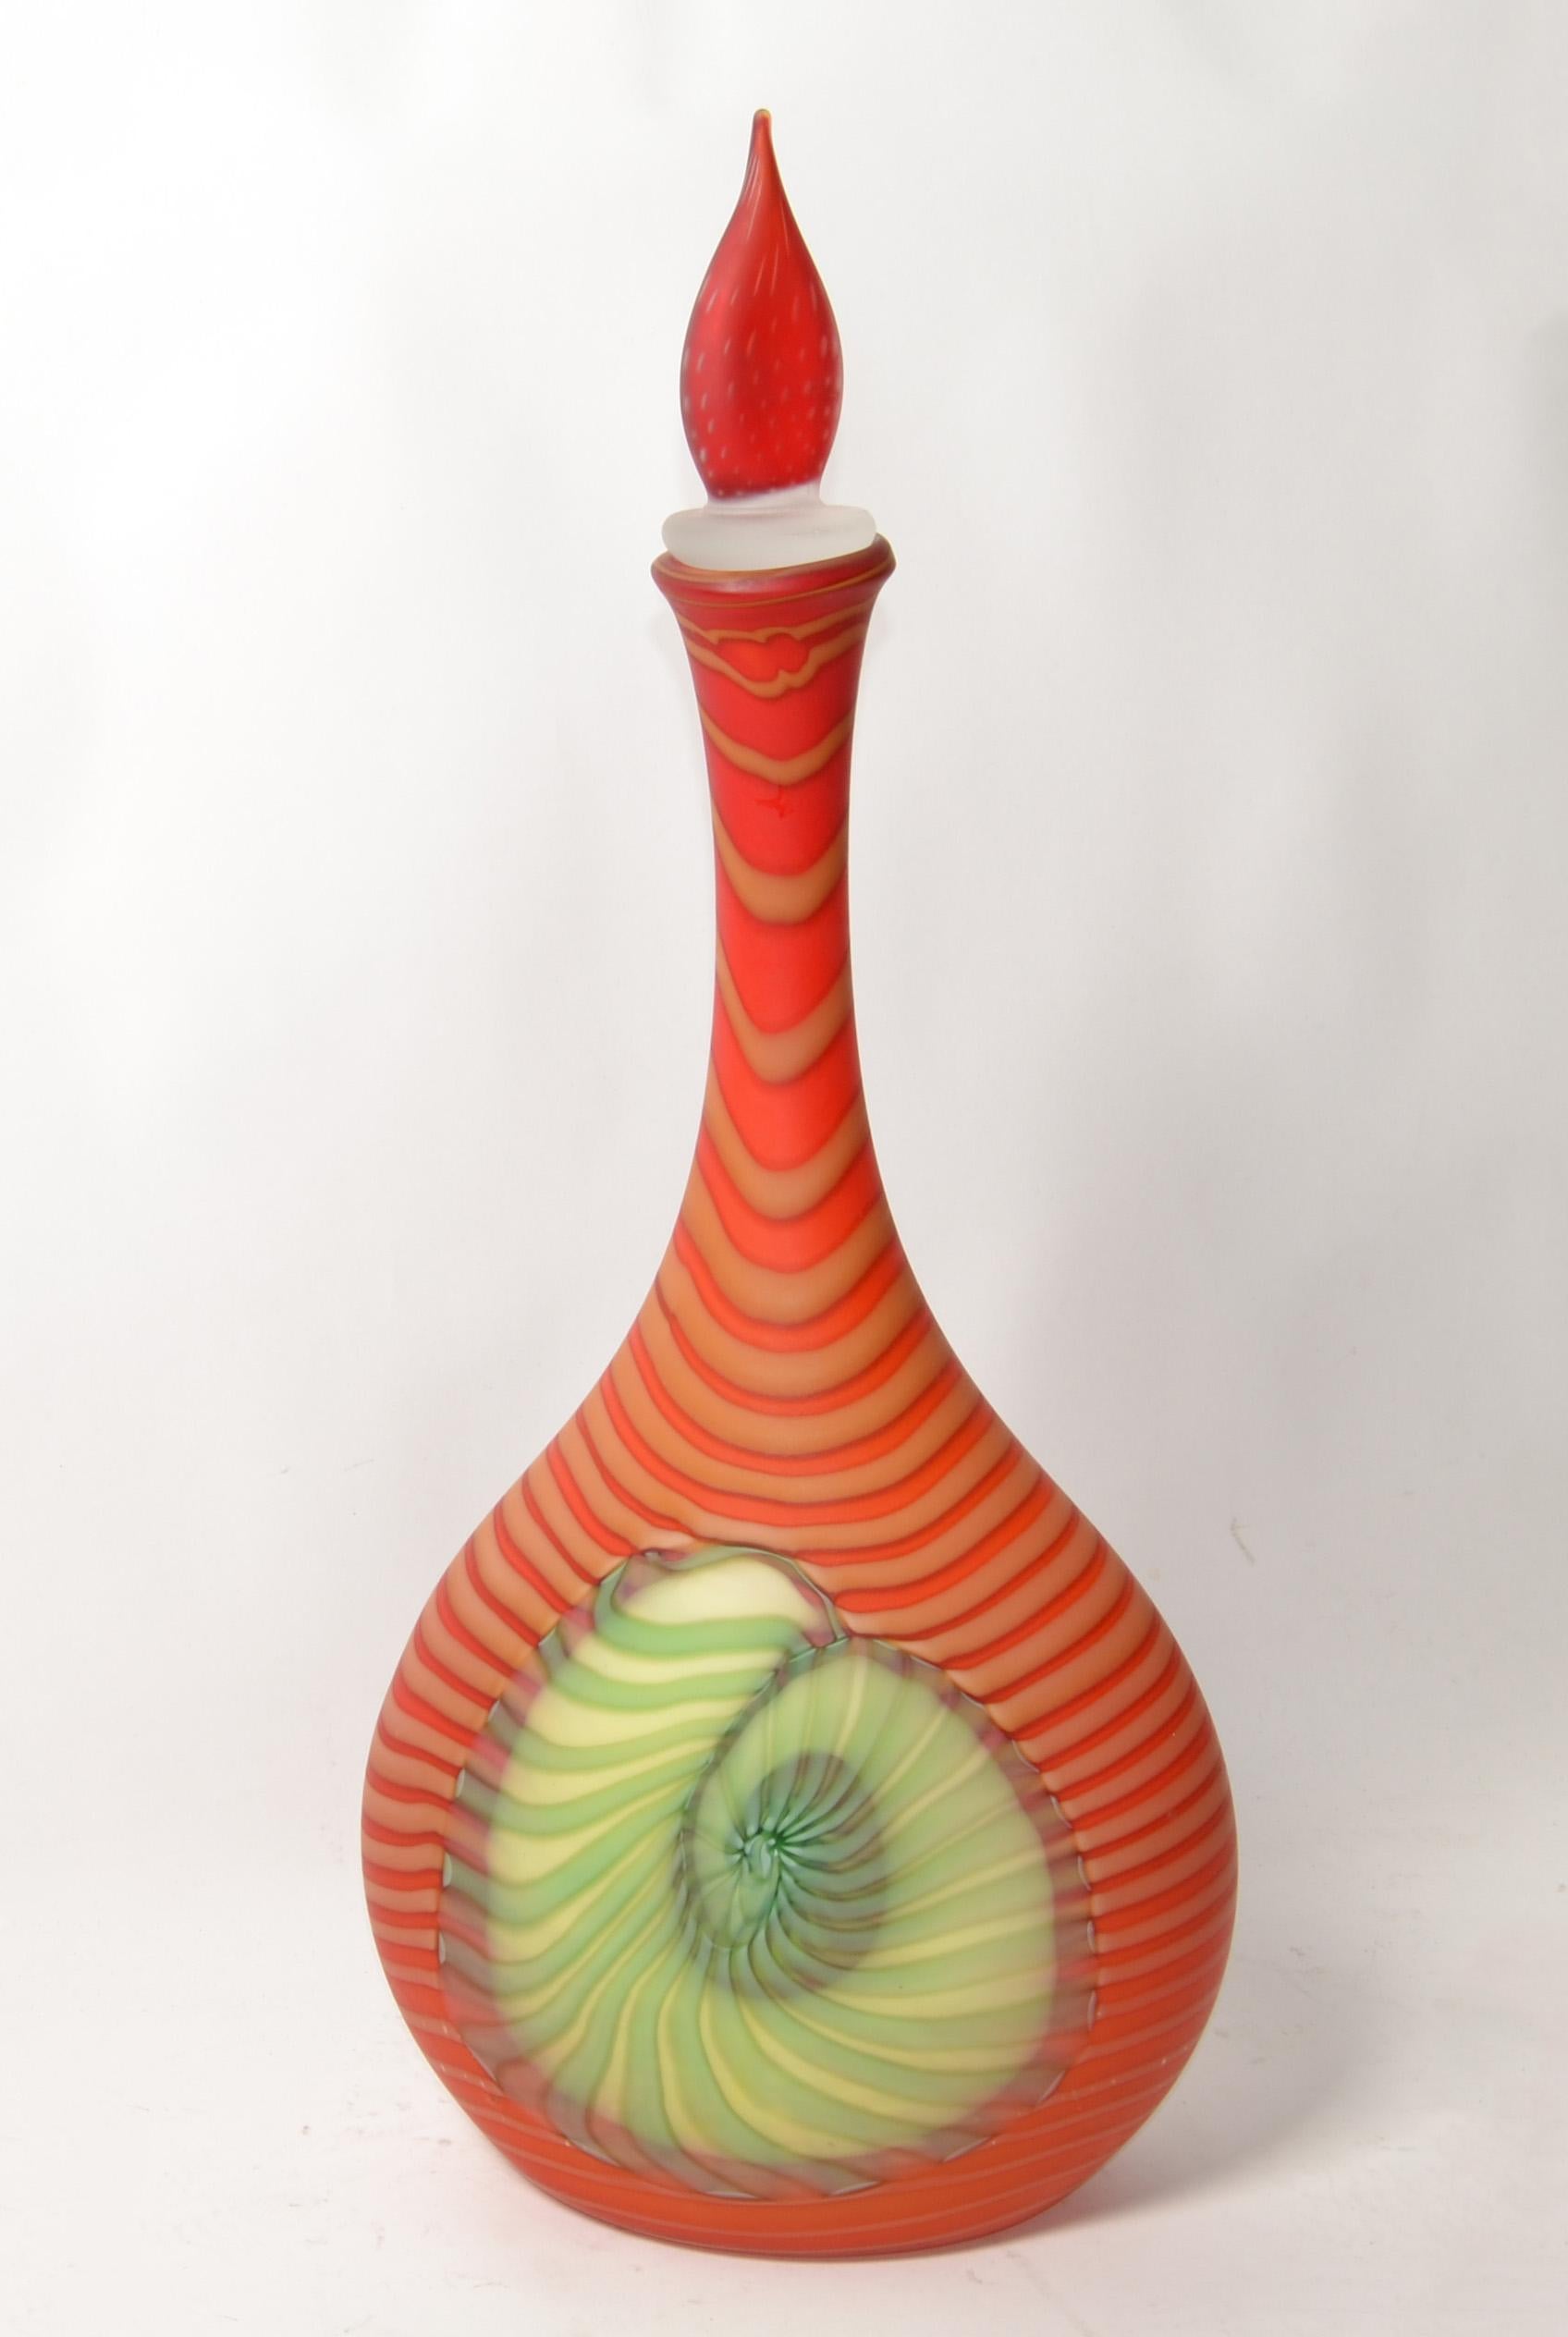 Engraved Giuliano Pinzan stunning and rare design Murano Art Glass hand blown red, orange, peach, green and blue with nautical Seashell Motives, genie bottle decanter. 
The piece is lined inside with white Glass and the outside has gorgeous swirl